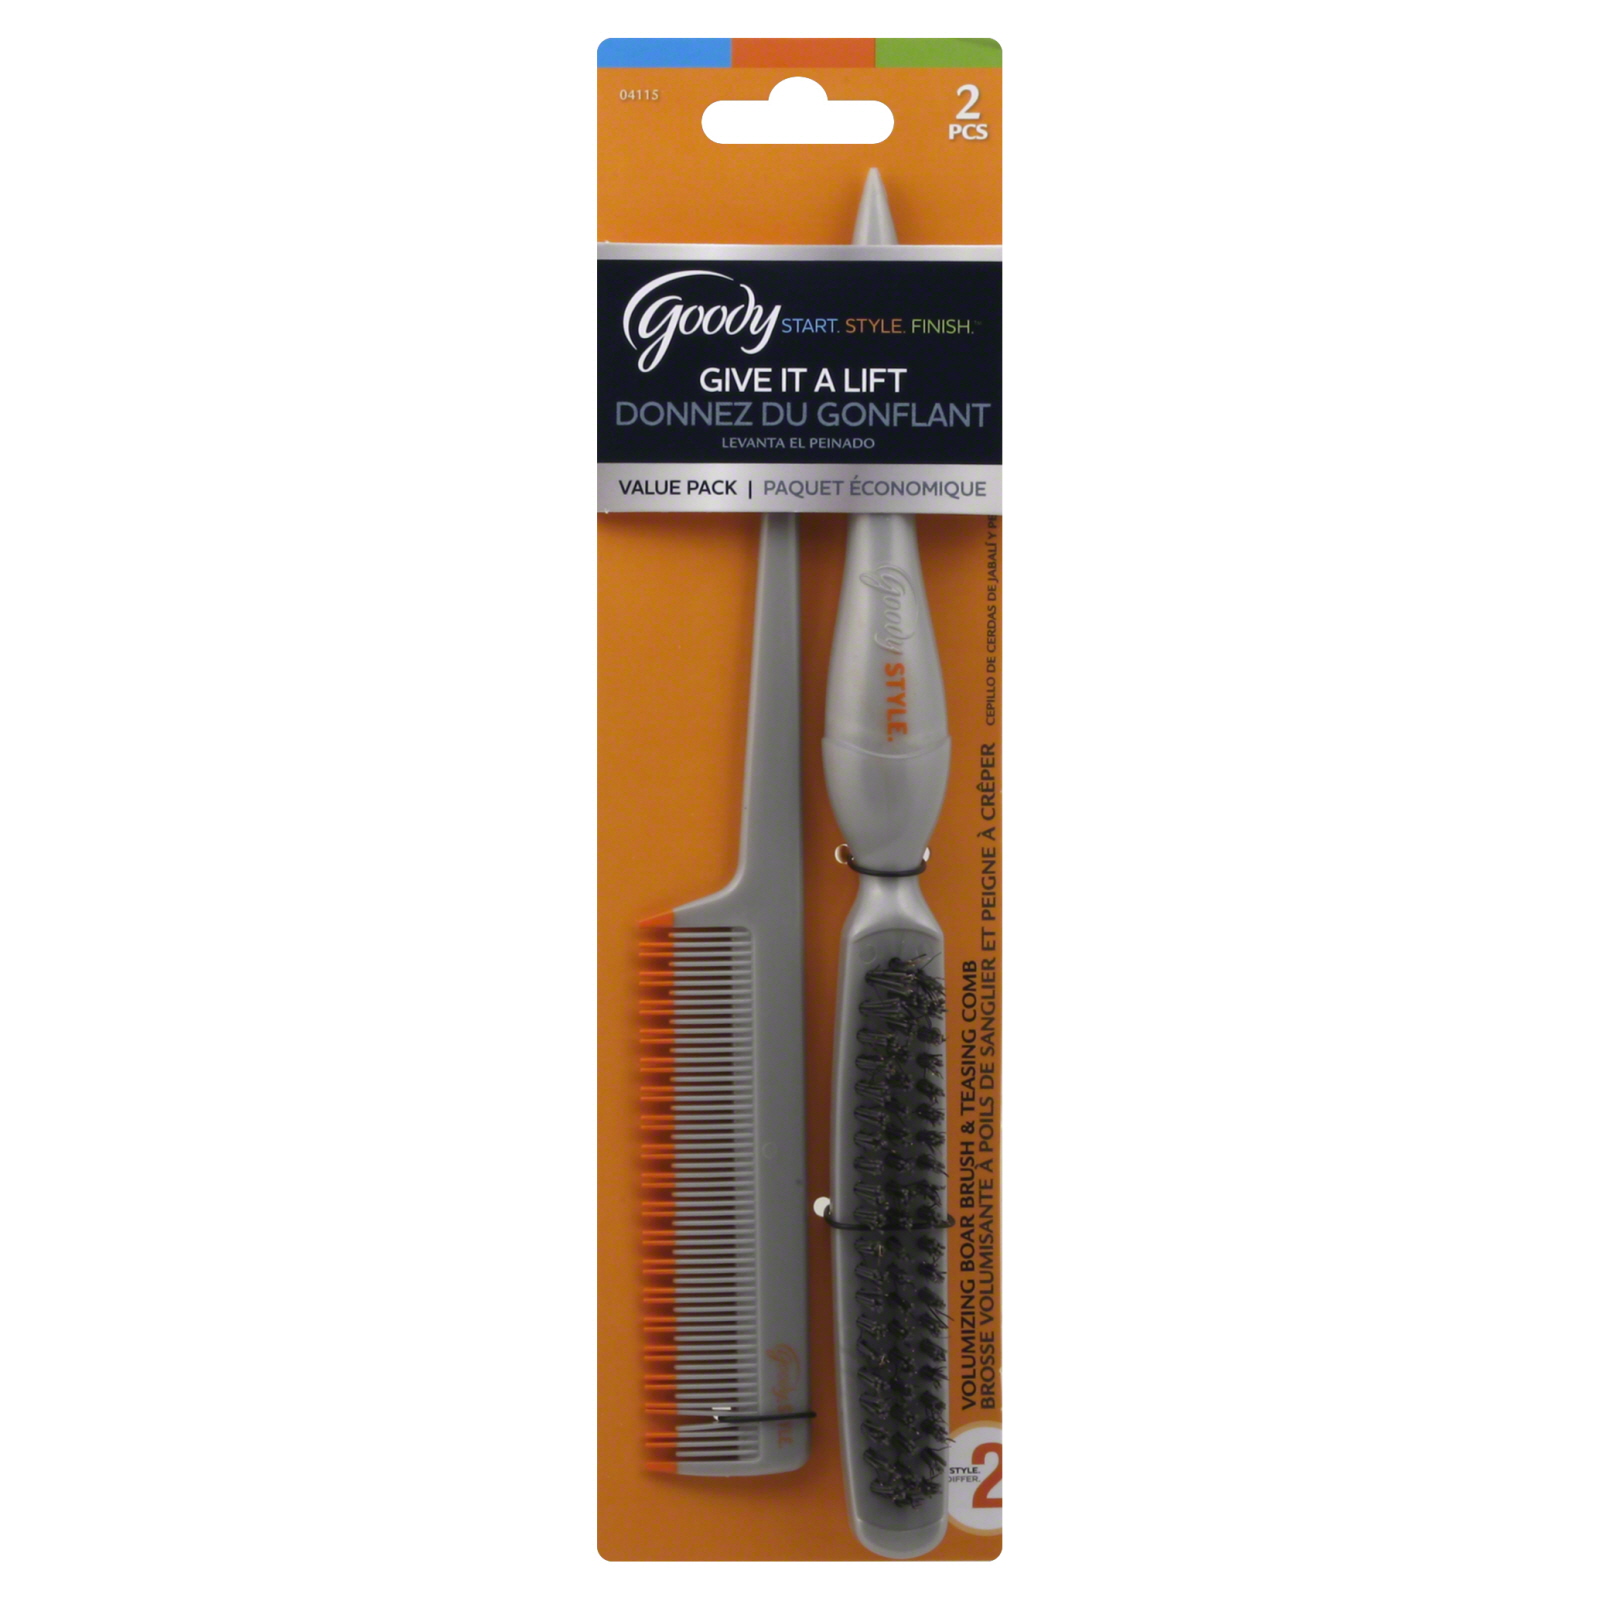 Goody Start, Style, Finish - Tease and Lift Volume Combo Pack (Comb & Brush), 2 CT